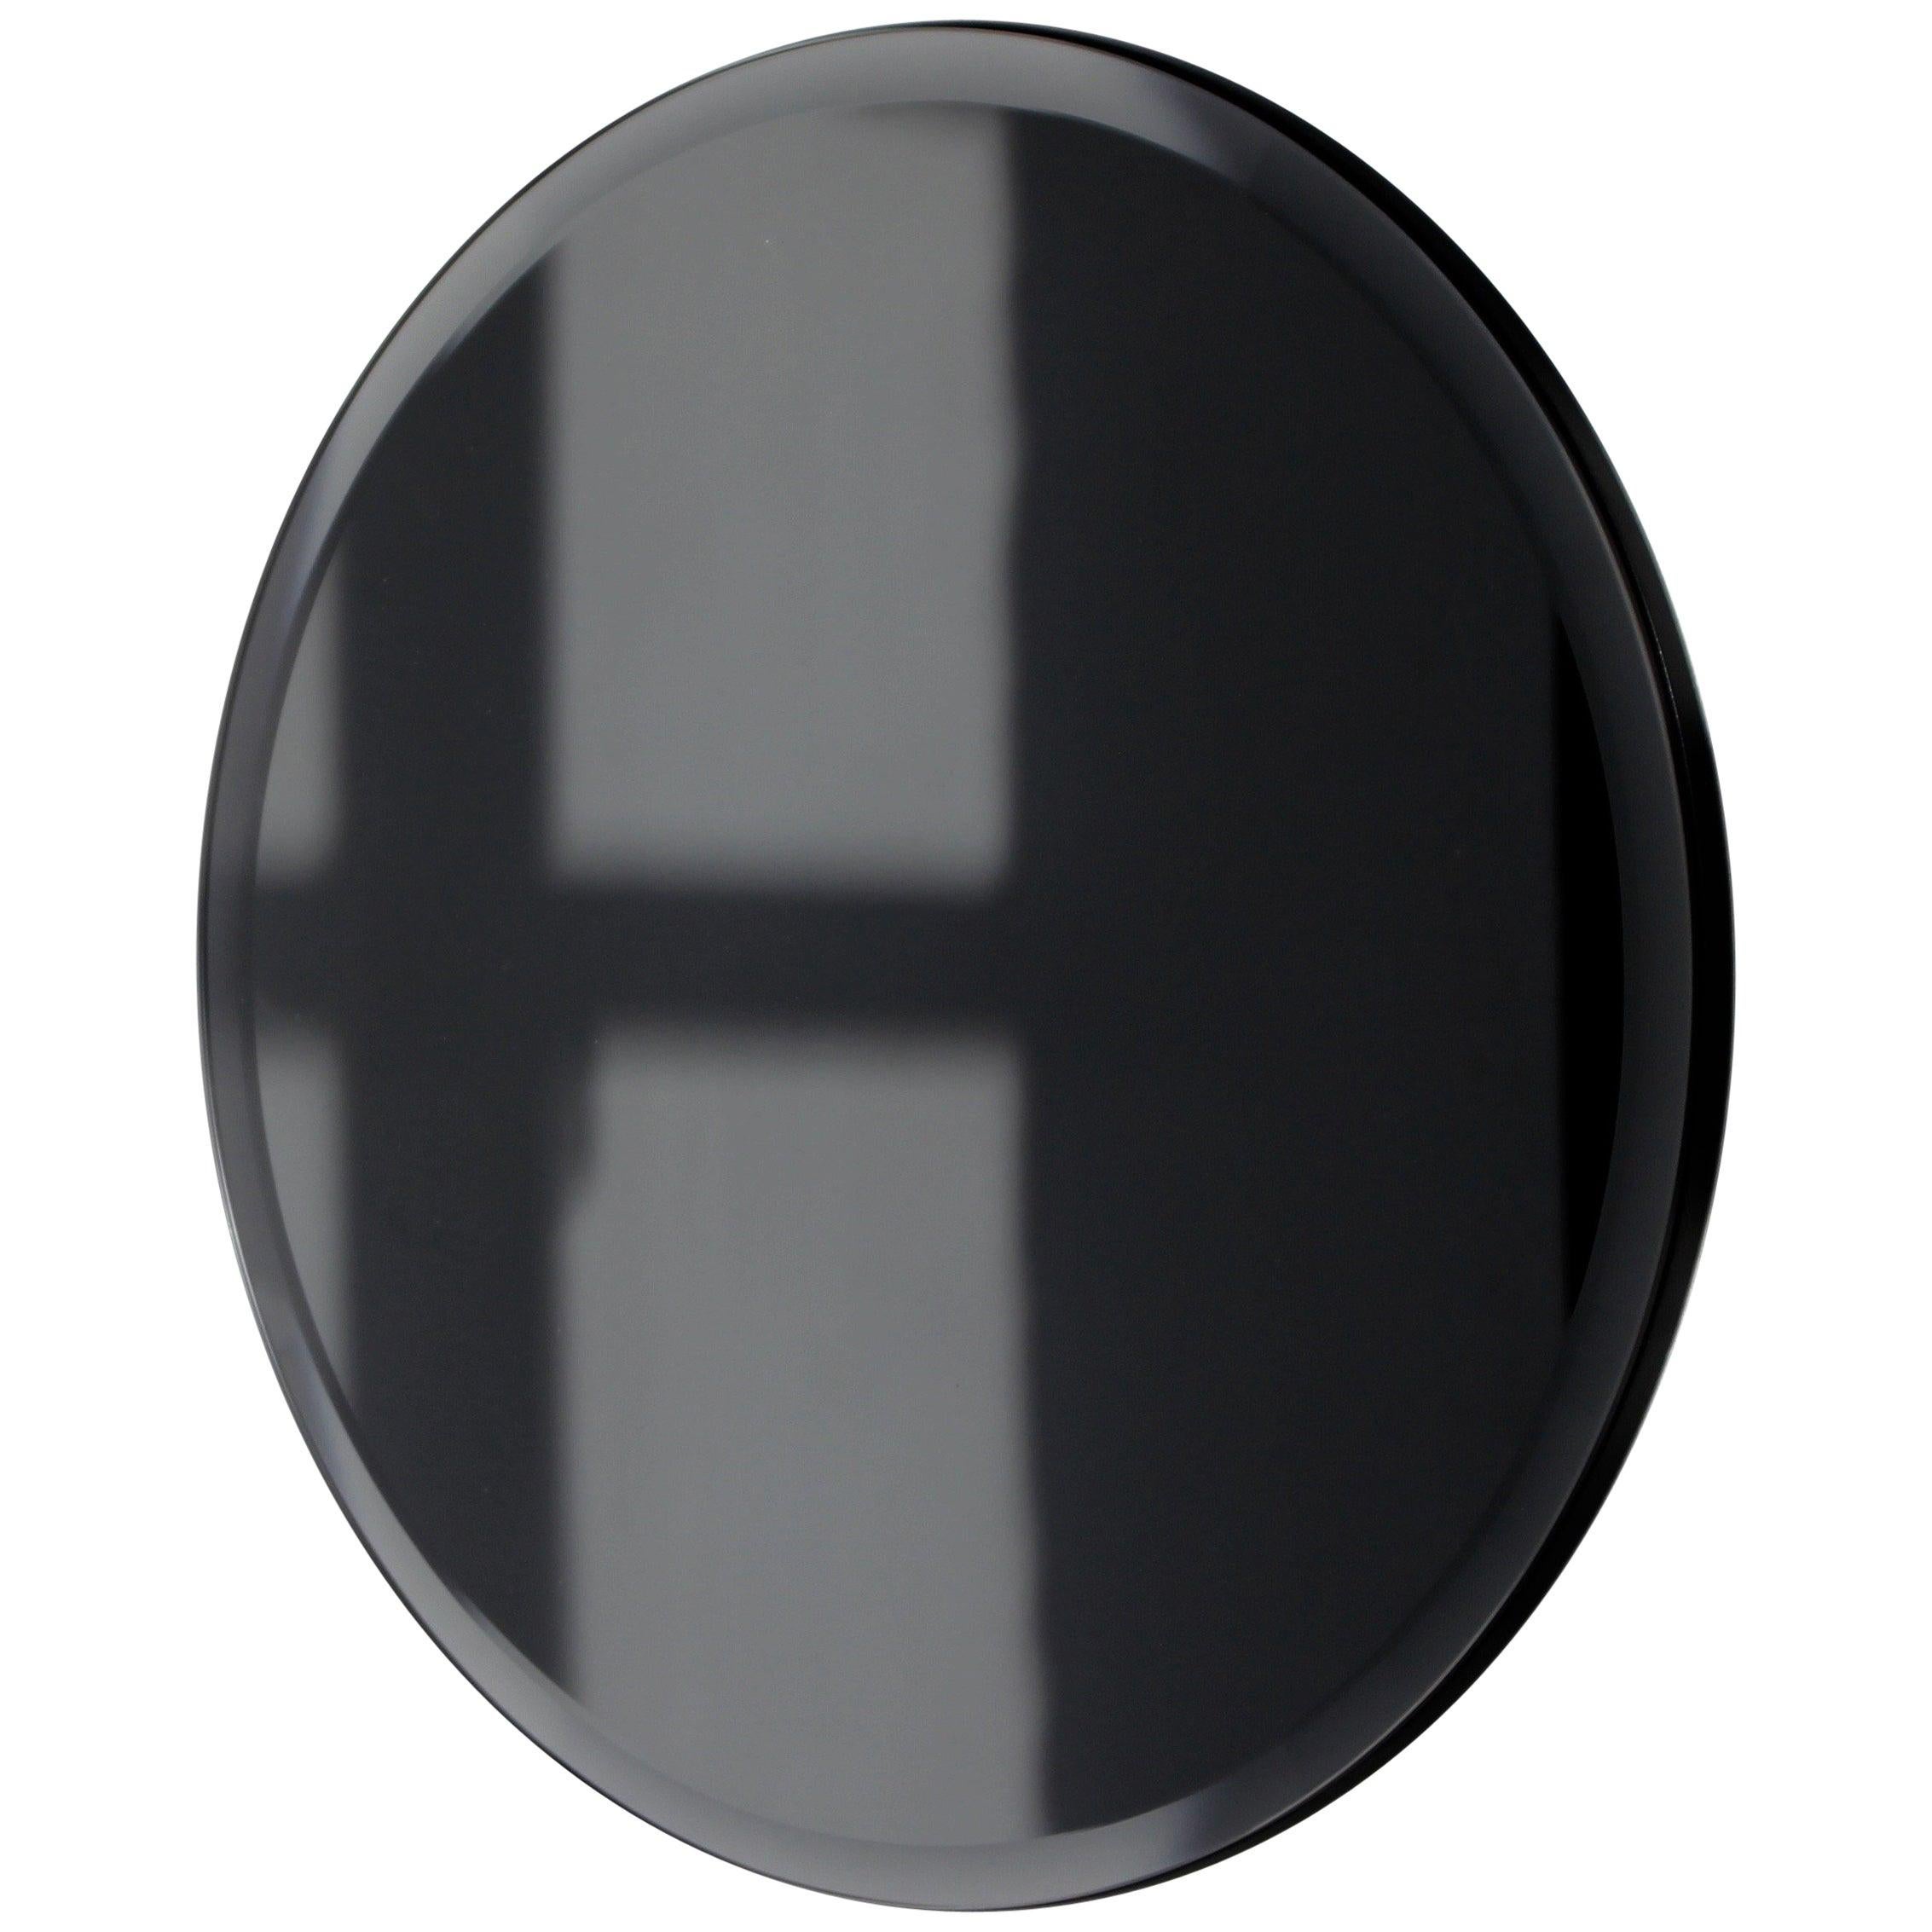 Orbis Bevelled Black Tinted Round Frameless Mirror Faux Leather Backing - XL